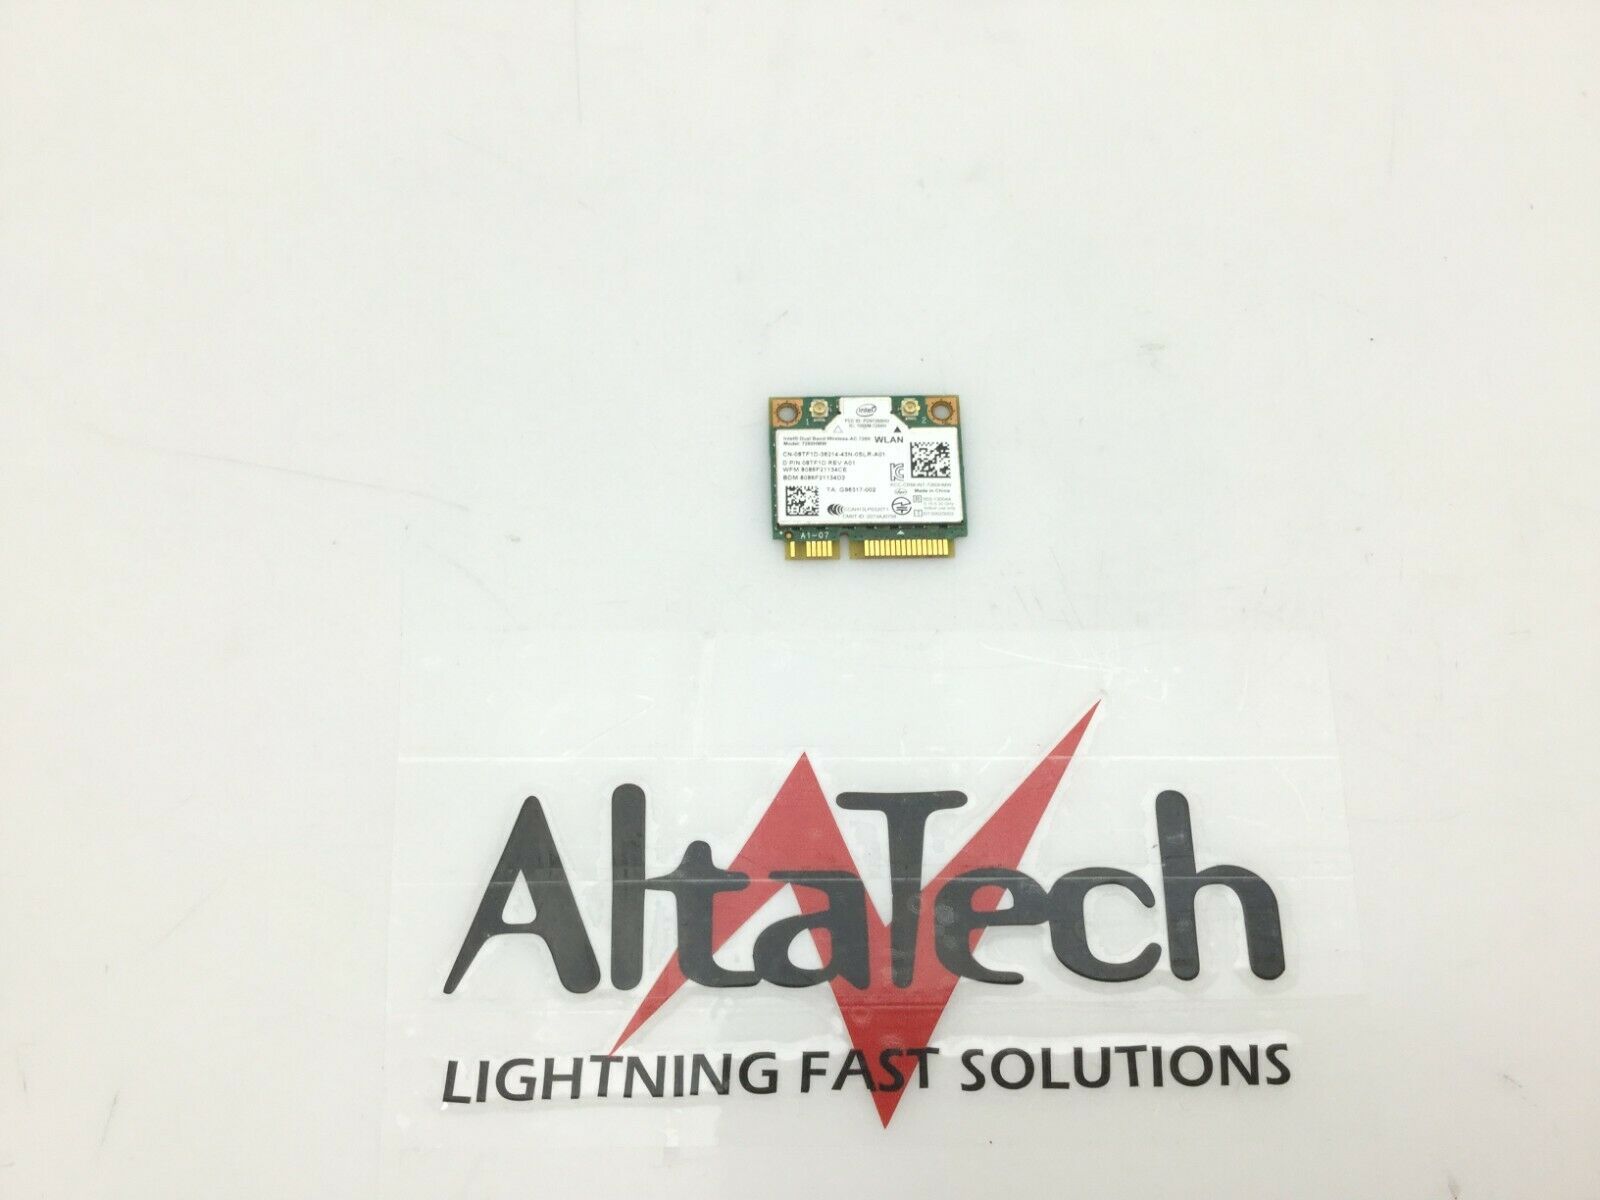 Dell 8TF1D WLAN DualBand Wireless-AC 7260 Laptop WiFi Card, Used